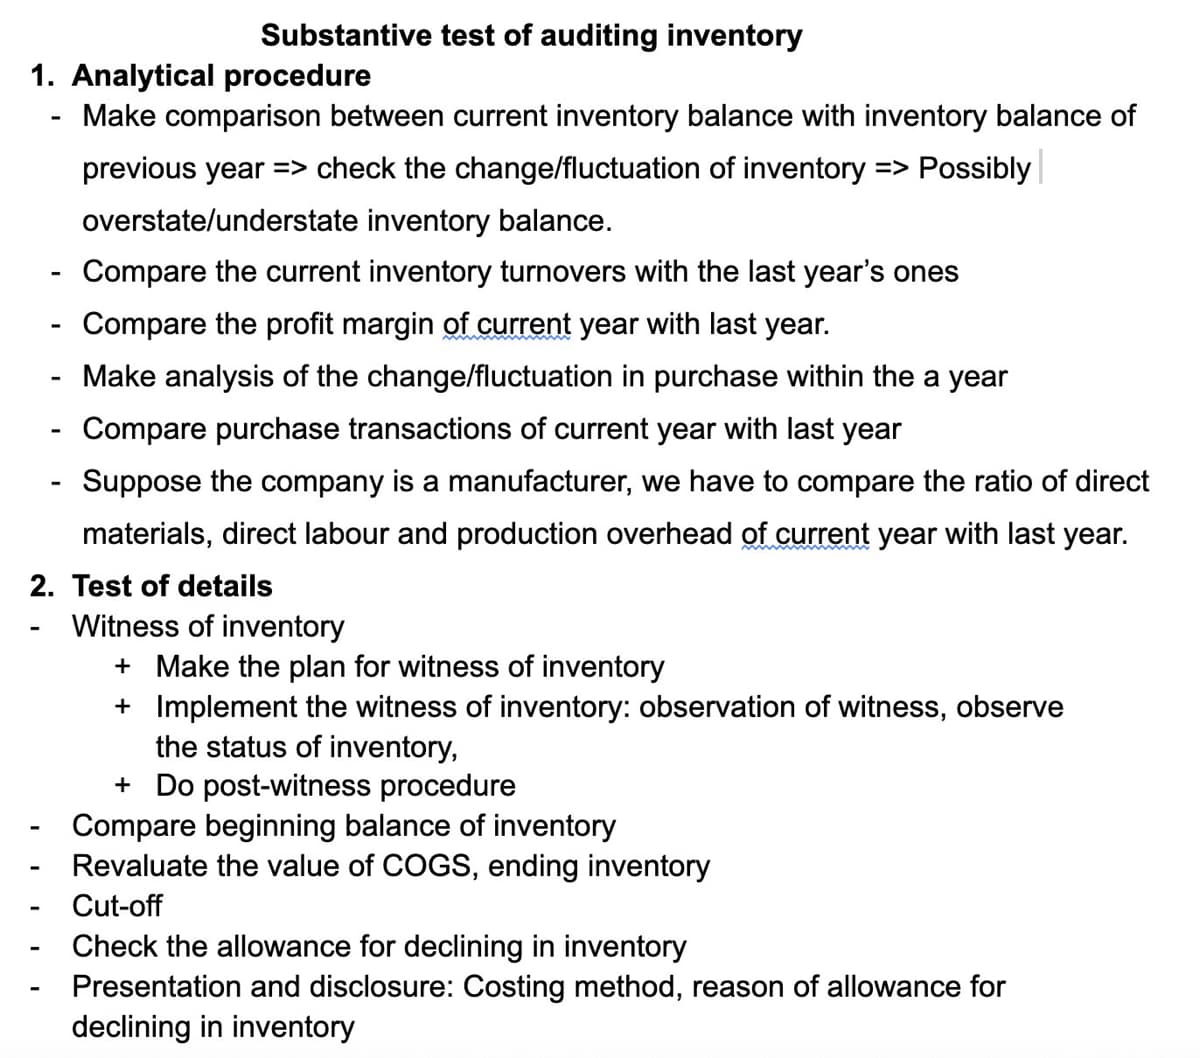 Substantive test of auditing inventory
1. Analytical procedure
Make comparison between current inventory balance with inventory balance of
previous year => check the change/fluctuation of inventory => Possibly
overstate/understate inventory balance.
Compare the current inventory turnovers with the last year's ones
Compare the profit margin of current year with last year.
Make analysis of the change/fluctuation in purchase within the a year
Compare purchase transactions of current year with last year
Suppose the company is a manufacturer, we have to compare the ratio of direct
materials, direct labour and production overhead of current year with last year.
2. Test of details
Witness of inventory
+ Make the plan for witness of inventory
+ Implement the witness of inventory: observation of witness, observe
the status of inventory,
+ Do post-witness procedure
Compare beginning balance of inventory
Revaluate the value of COGS, ending inventory
Cut-off
Check the allowance for declining in inventory
Presentation and disclosure: Costing method, reason of allowance for
declining in inventory
